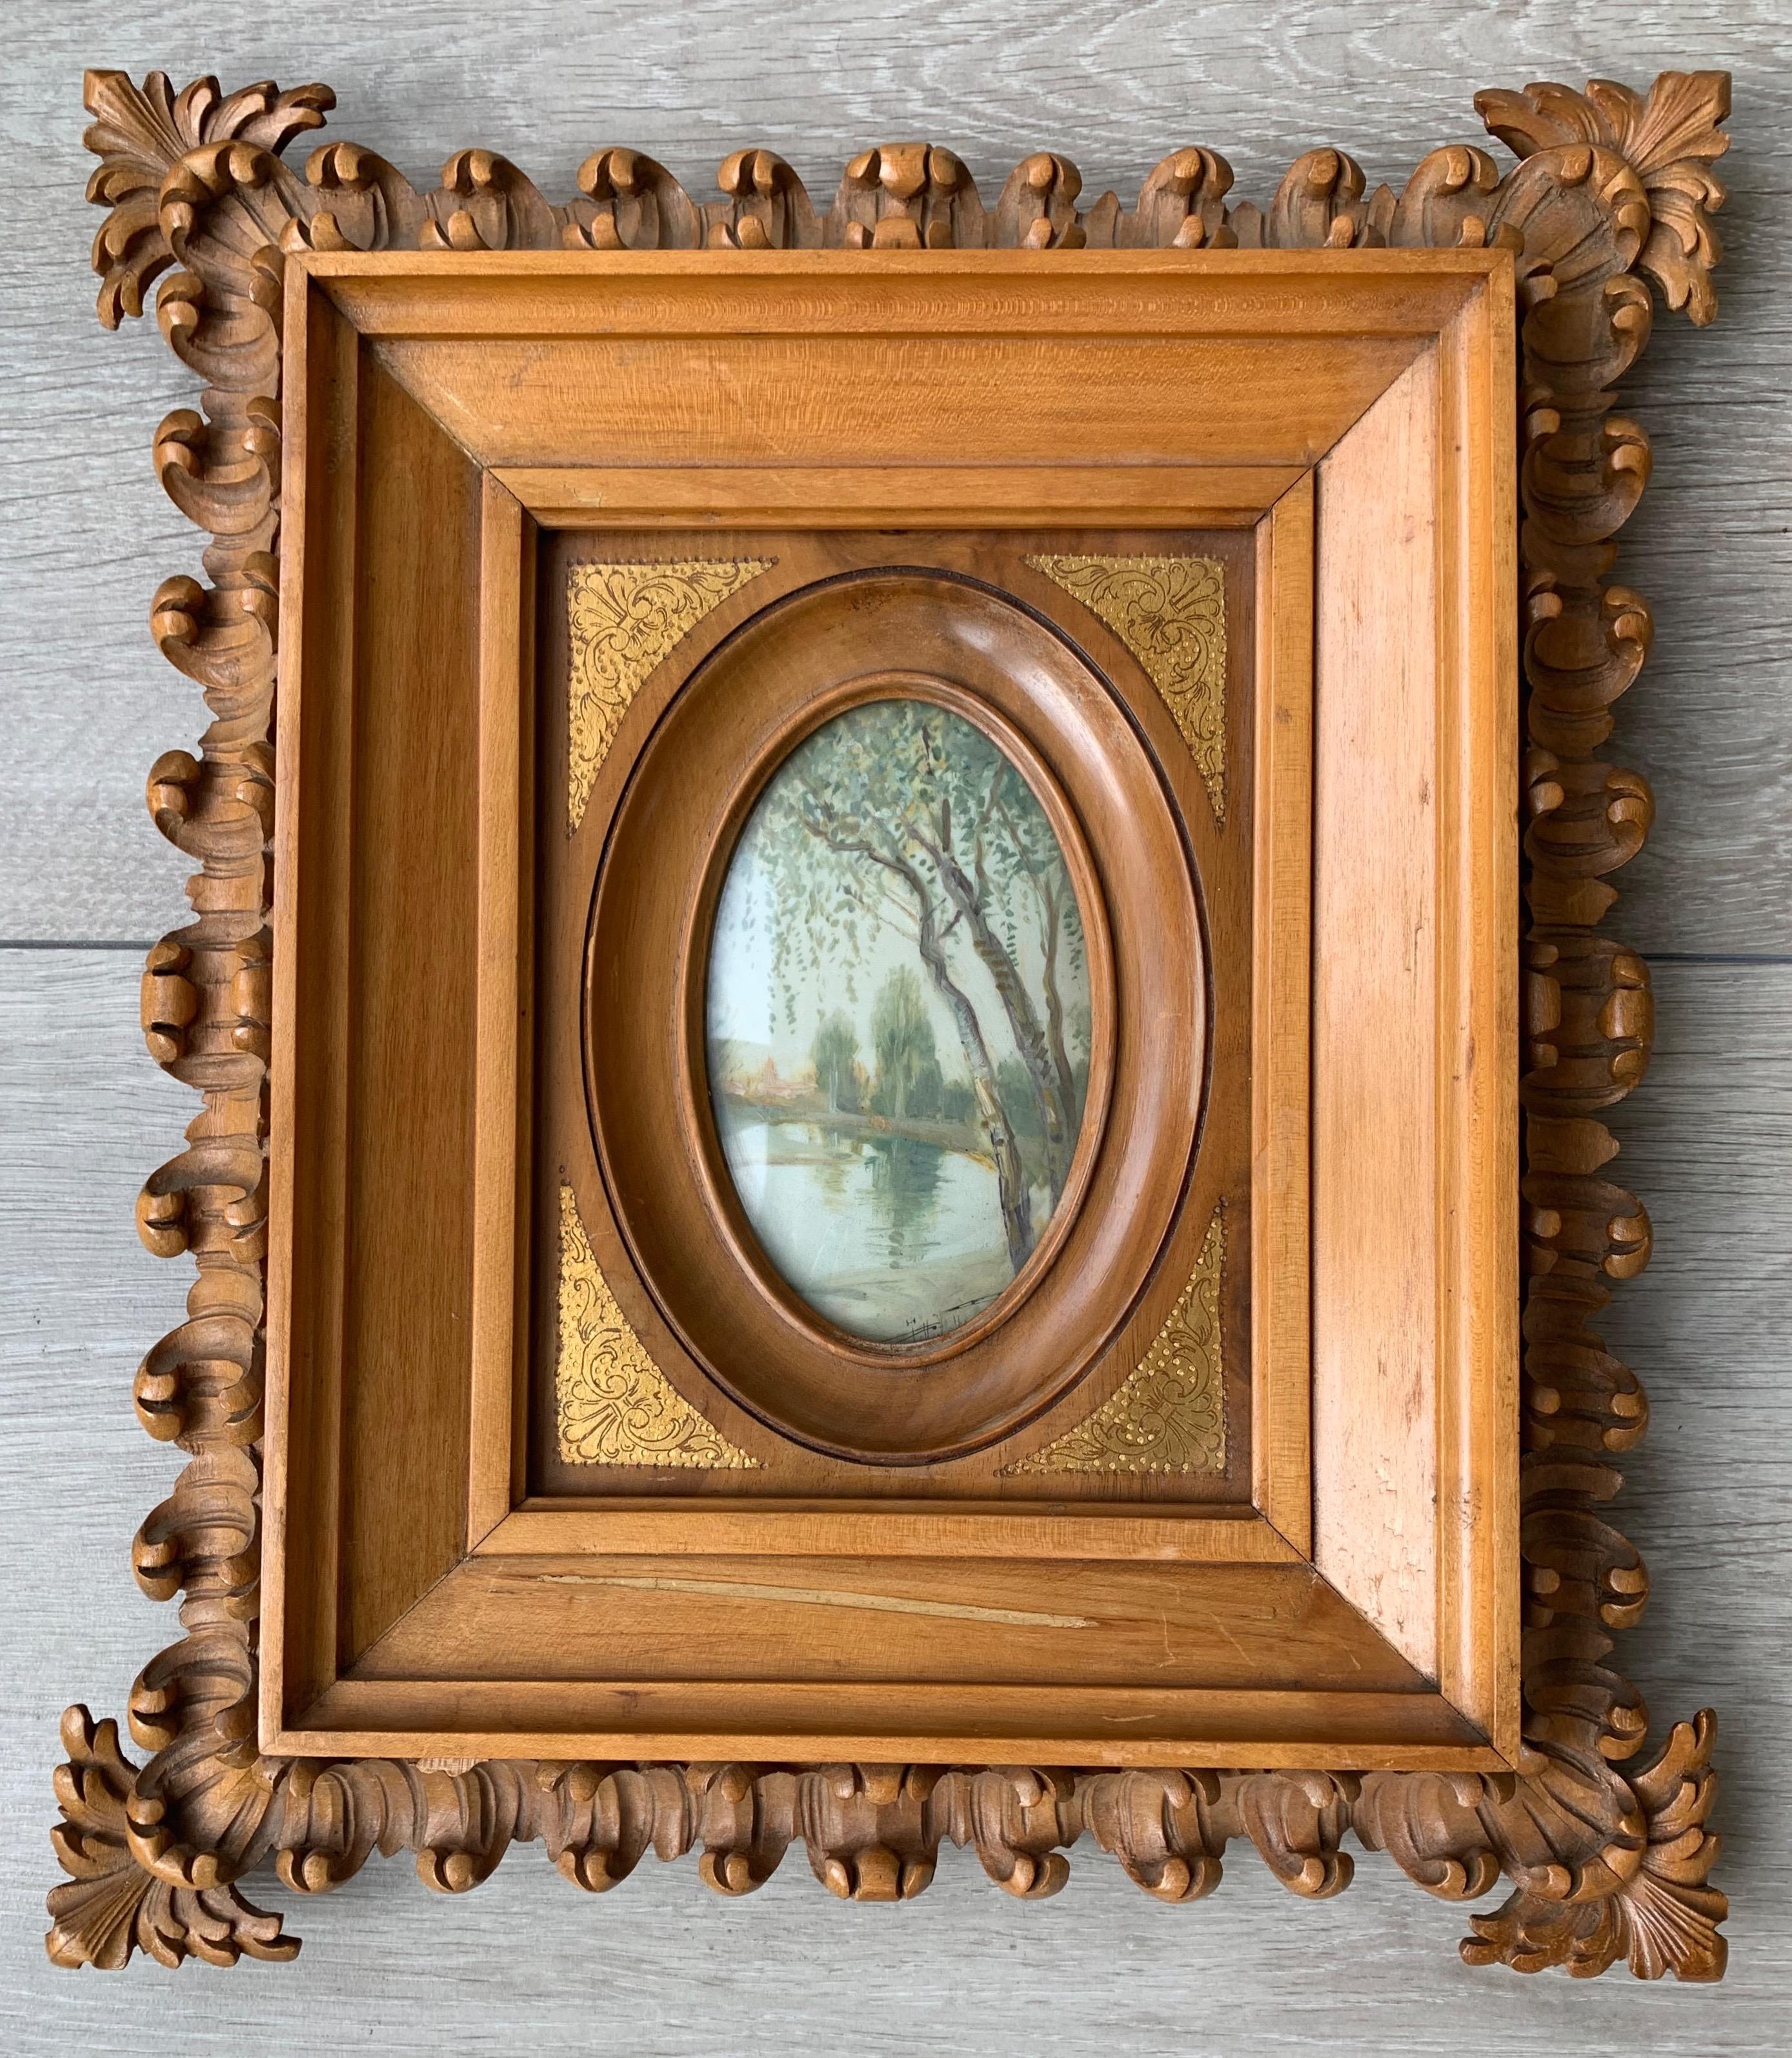 Rare Antique and Stylishly Handcrafted Beechwood Picture Frame with Painting 3